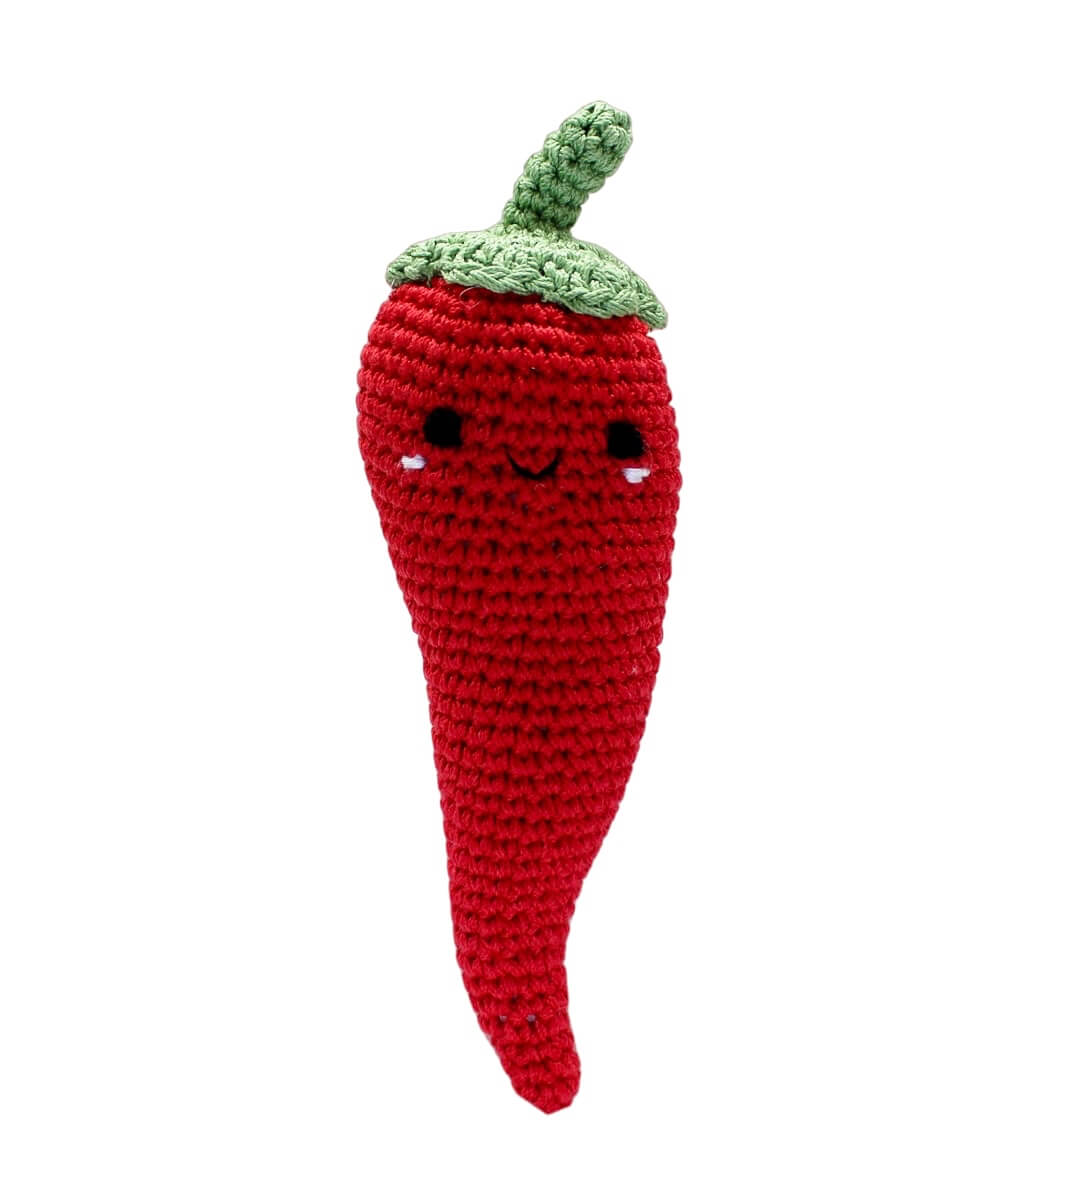 Knit Knacks "Chili P. Pepper" handmade organic cotton dog toy. Red anthropomorphic chili pepper with a happy expression, rosy cheeks, and a green stem on its head.